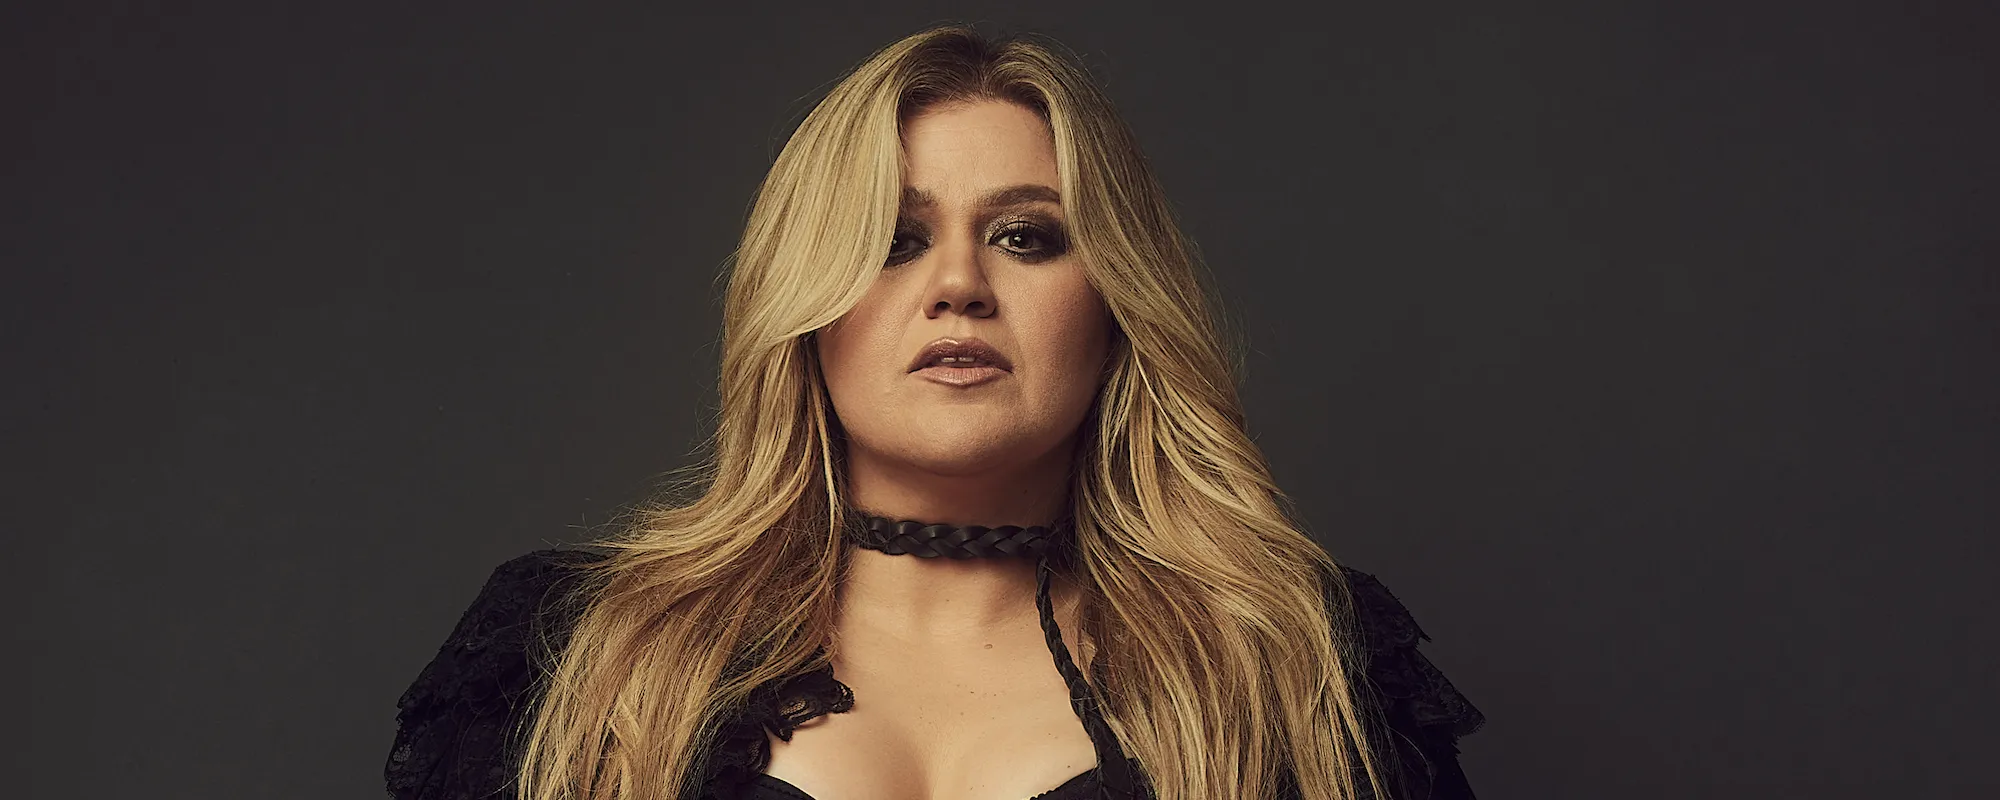 The Angsty Meaning Behind Kelly Clarkson’s “Behind These Hazel Eyes”